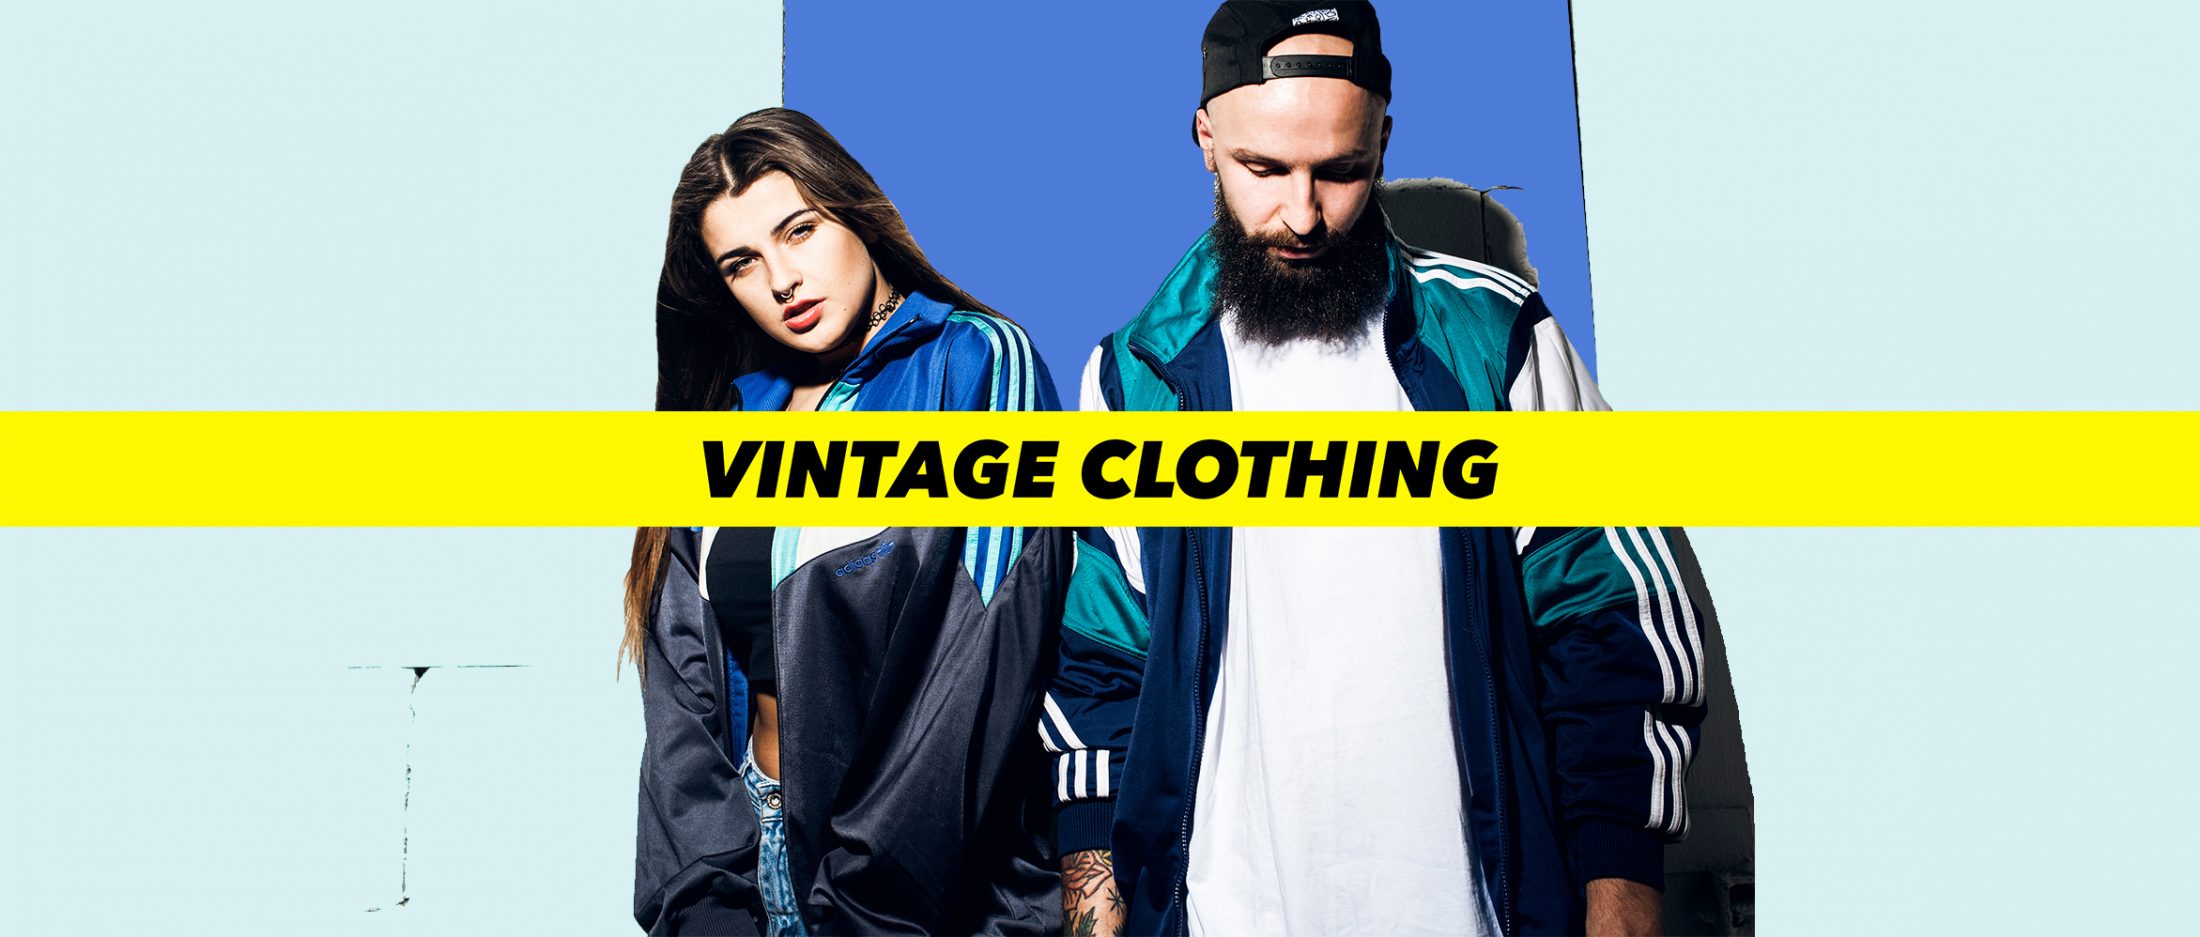 Vintage clothing online store